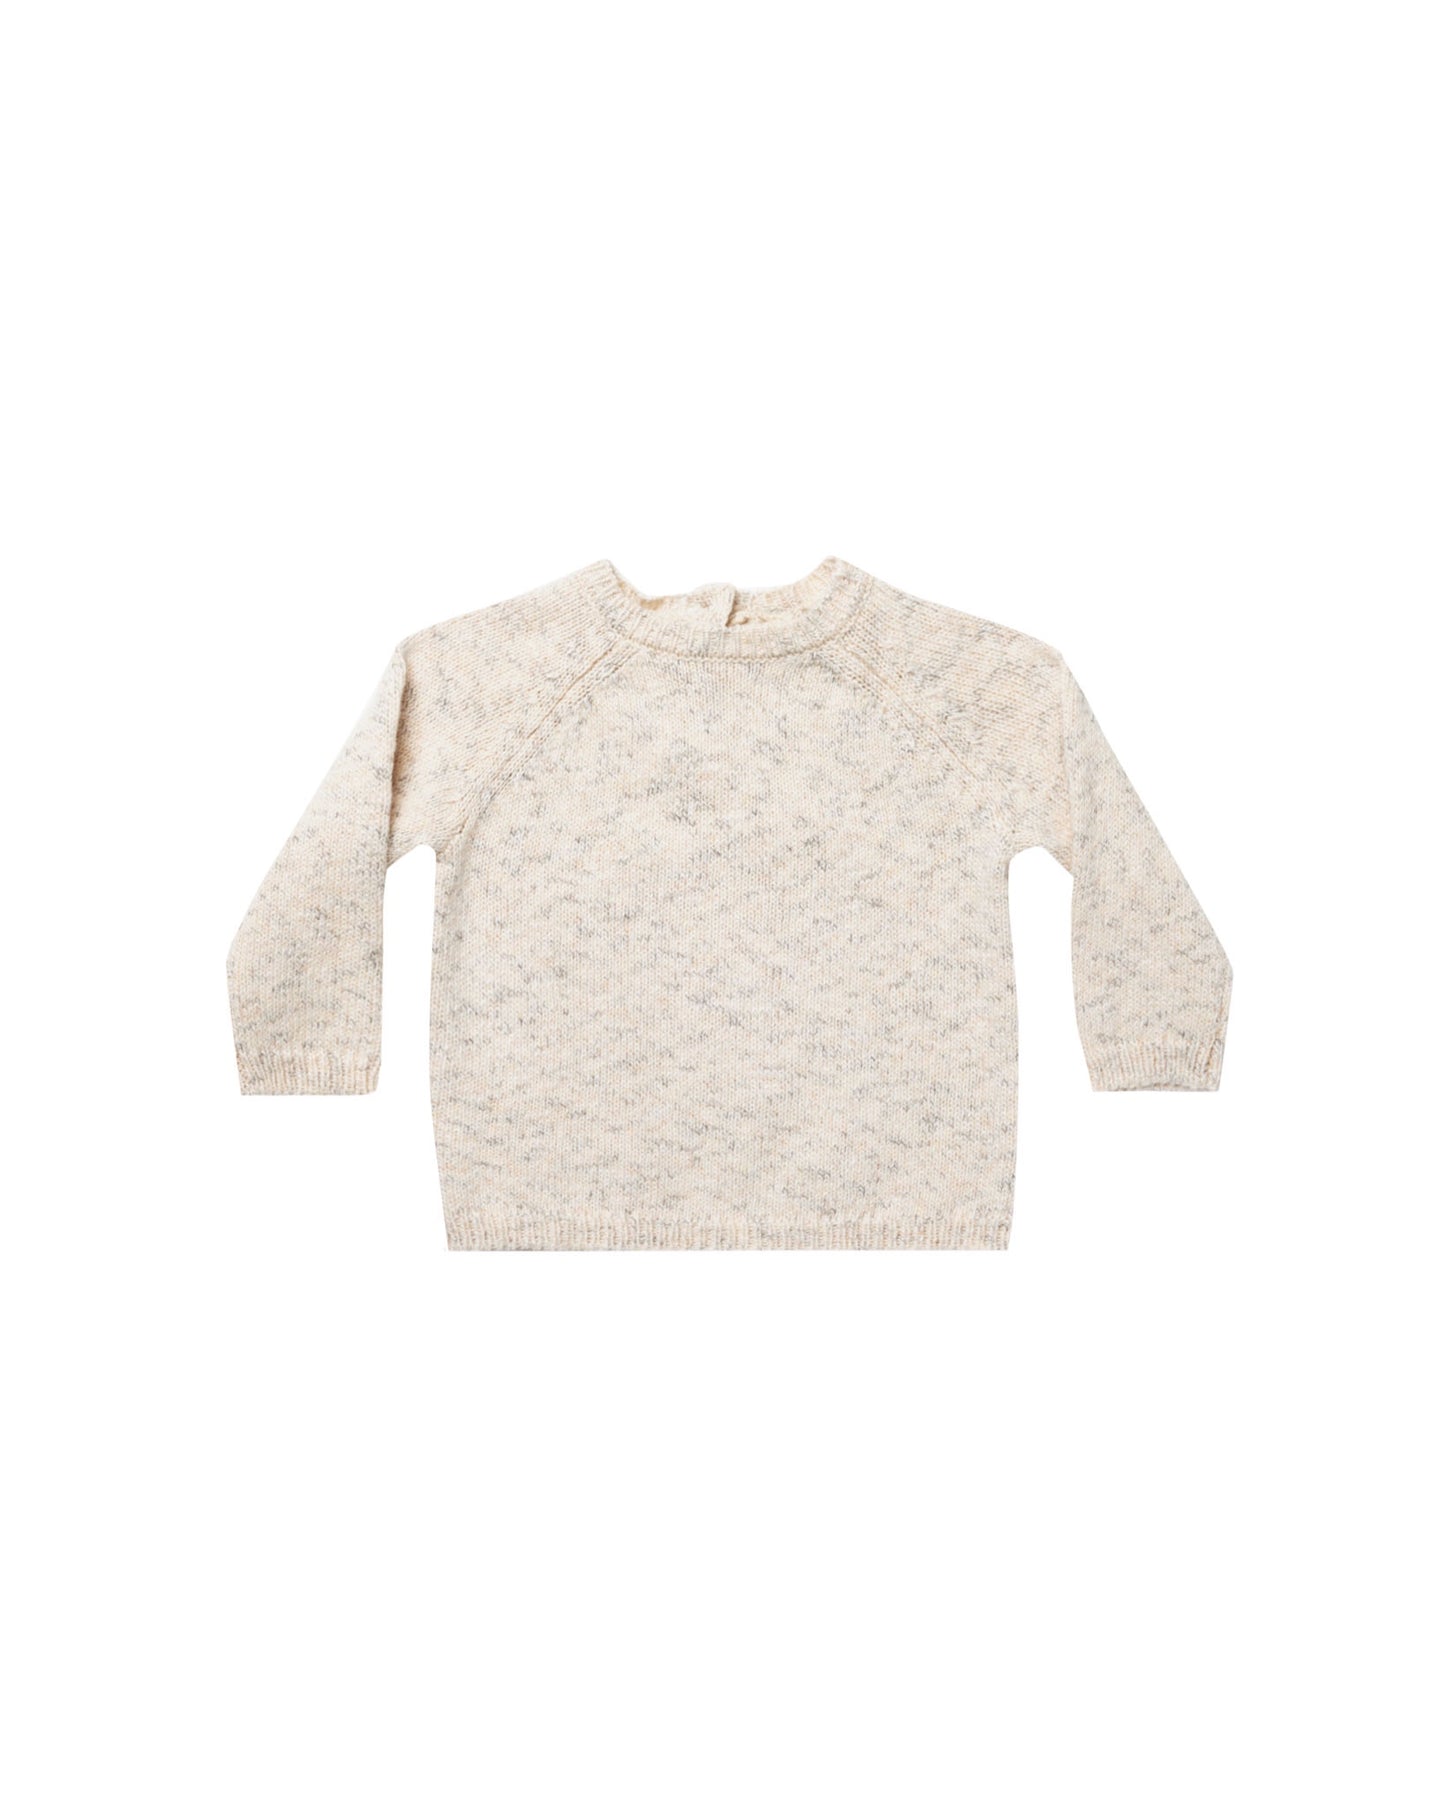 Speckled Knit Sweater / Natural